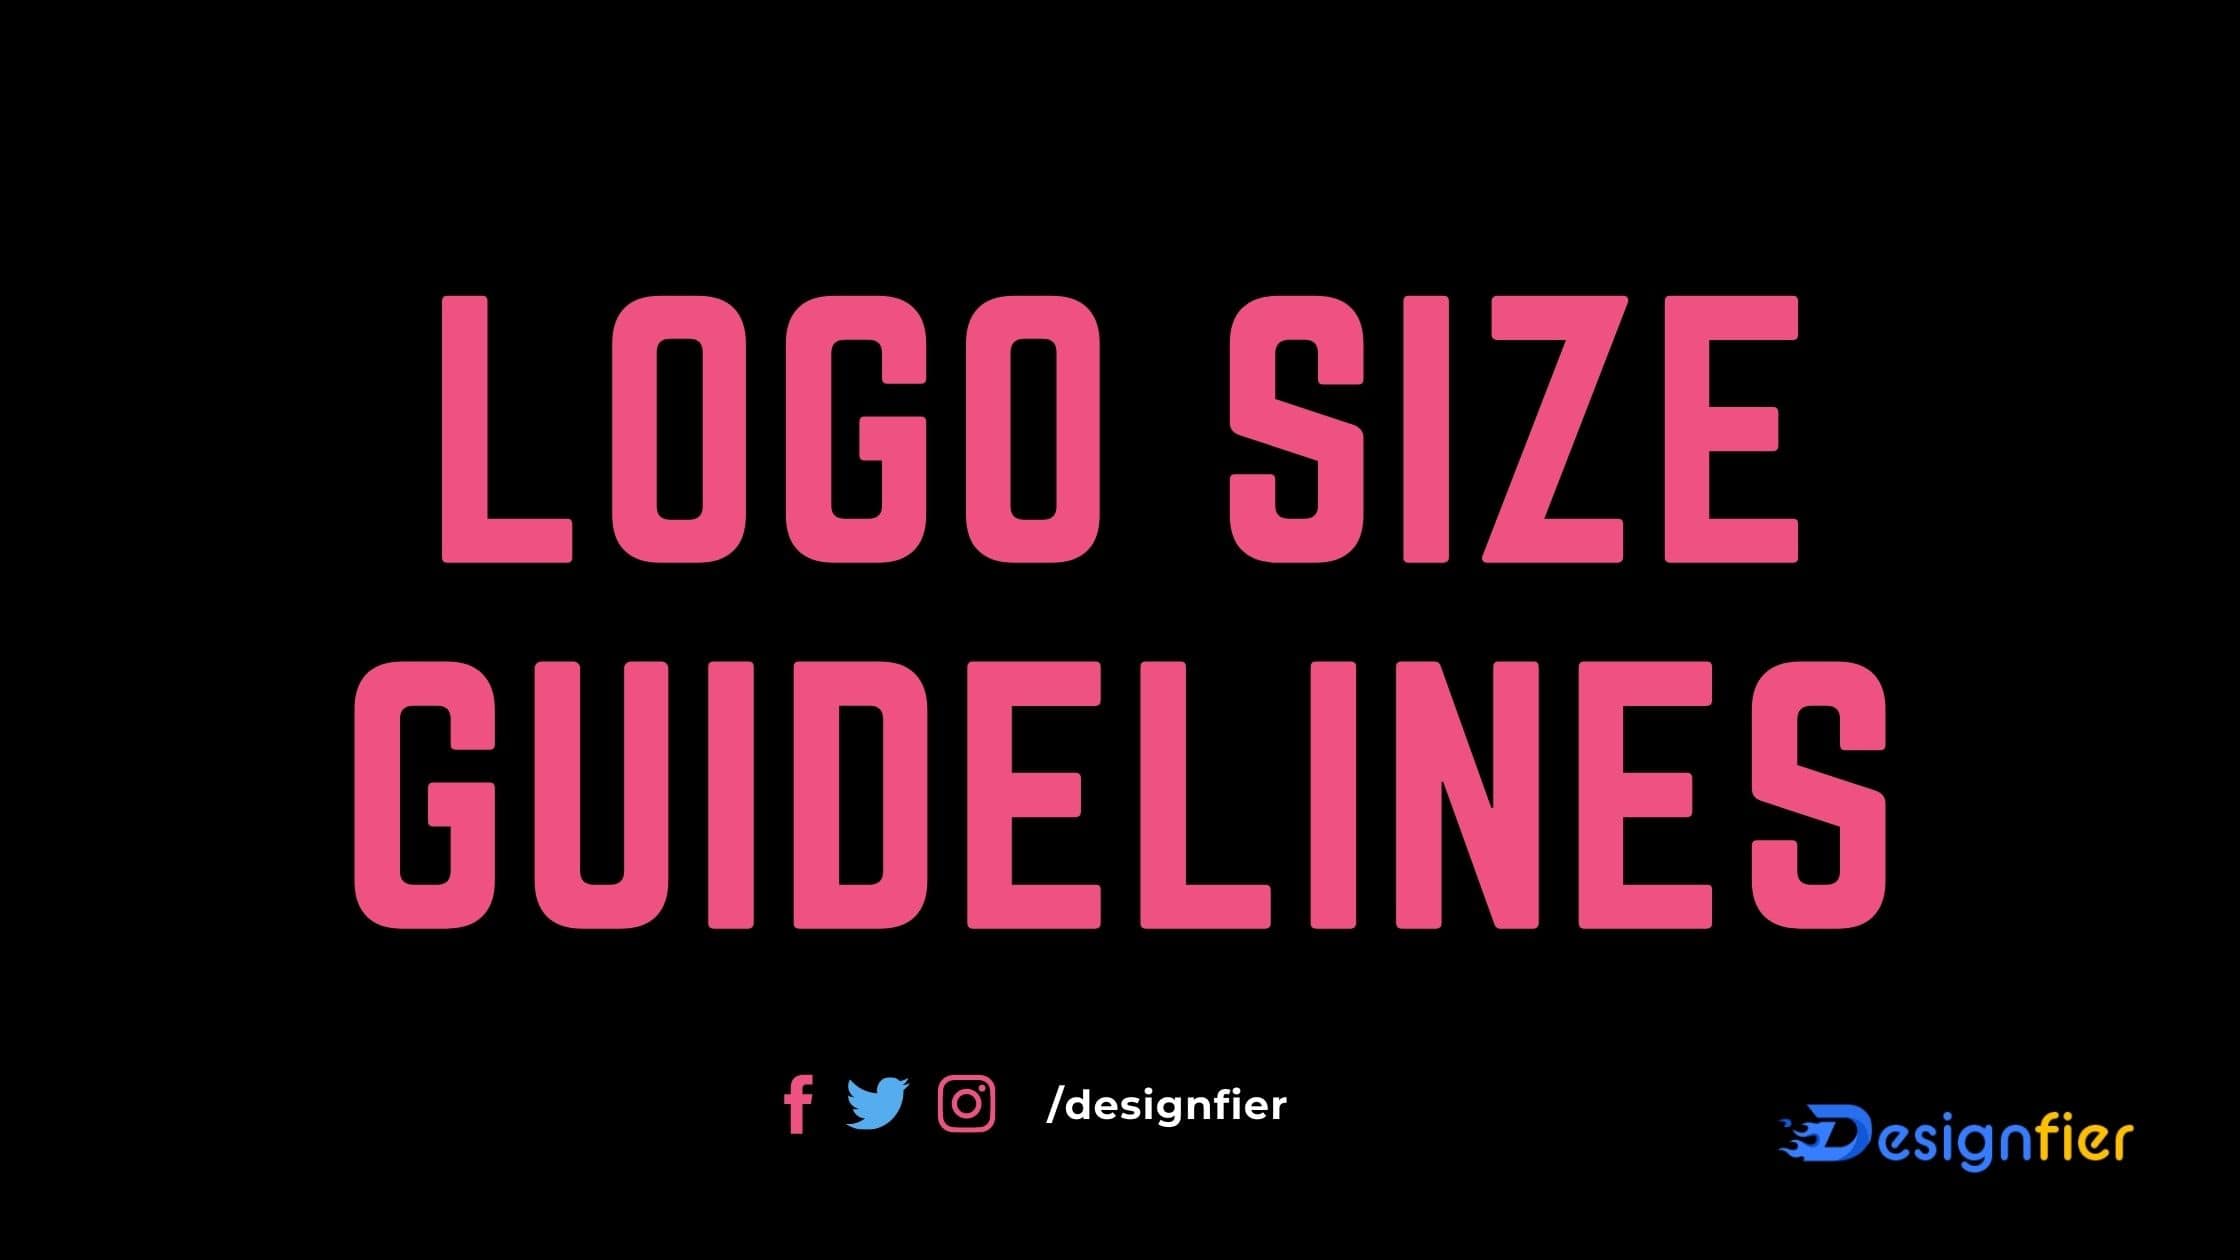 How to get the ideal logo size for all your marketing needs